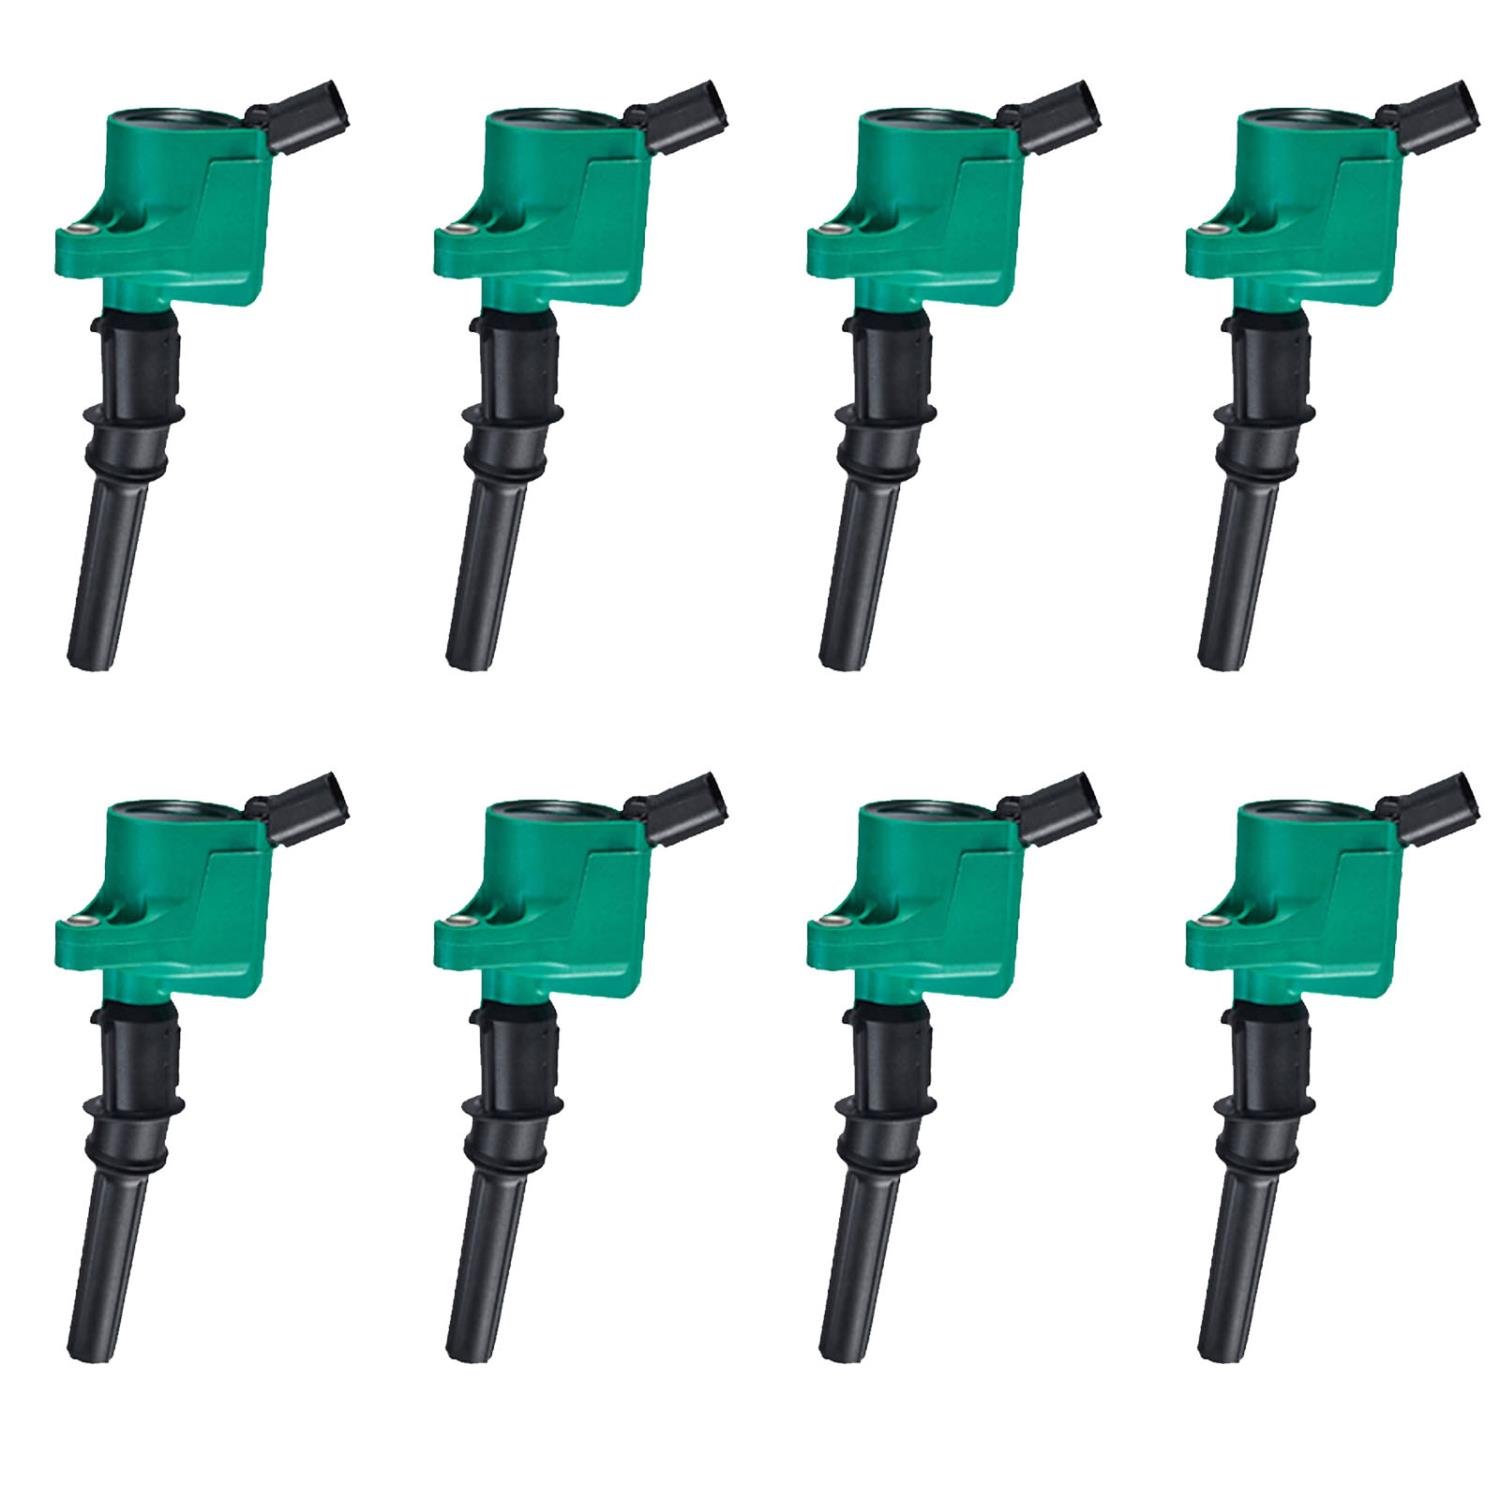 High-Performance Ignition Coils for 1998-2008 Ford F-150/E-150/Expedition [Green]